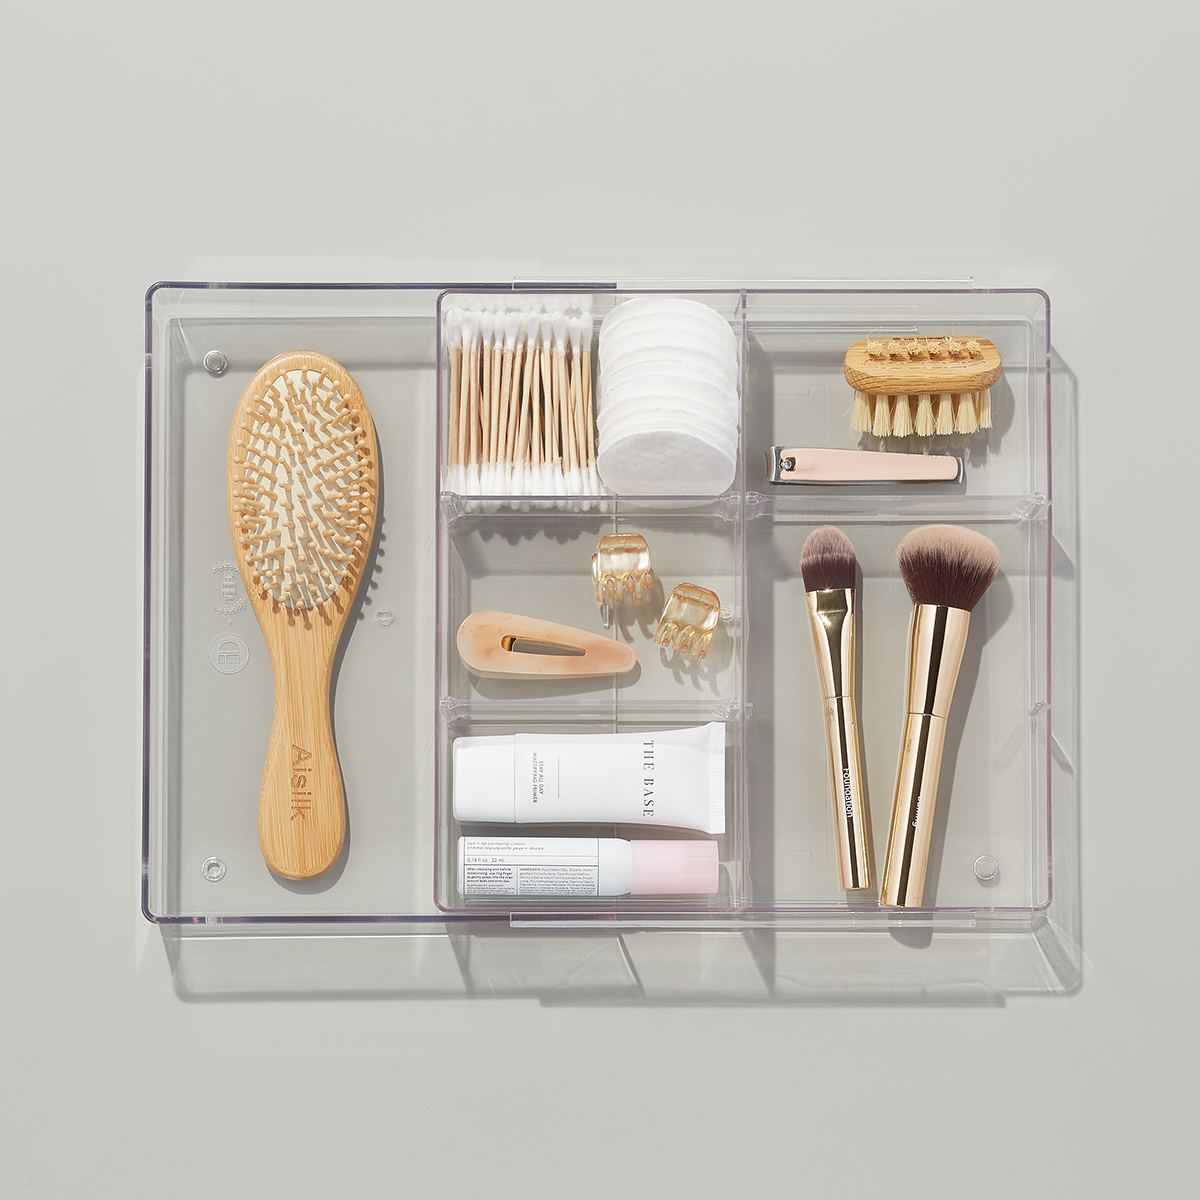 https://www.containerstore.com/catalogimages/393673/10082301-THE-expandable-drawer-organ.jpg